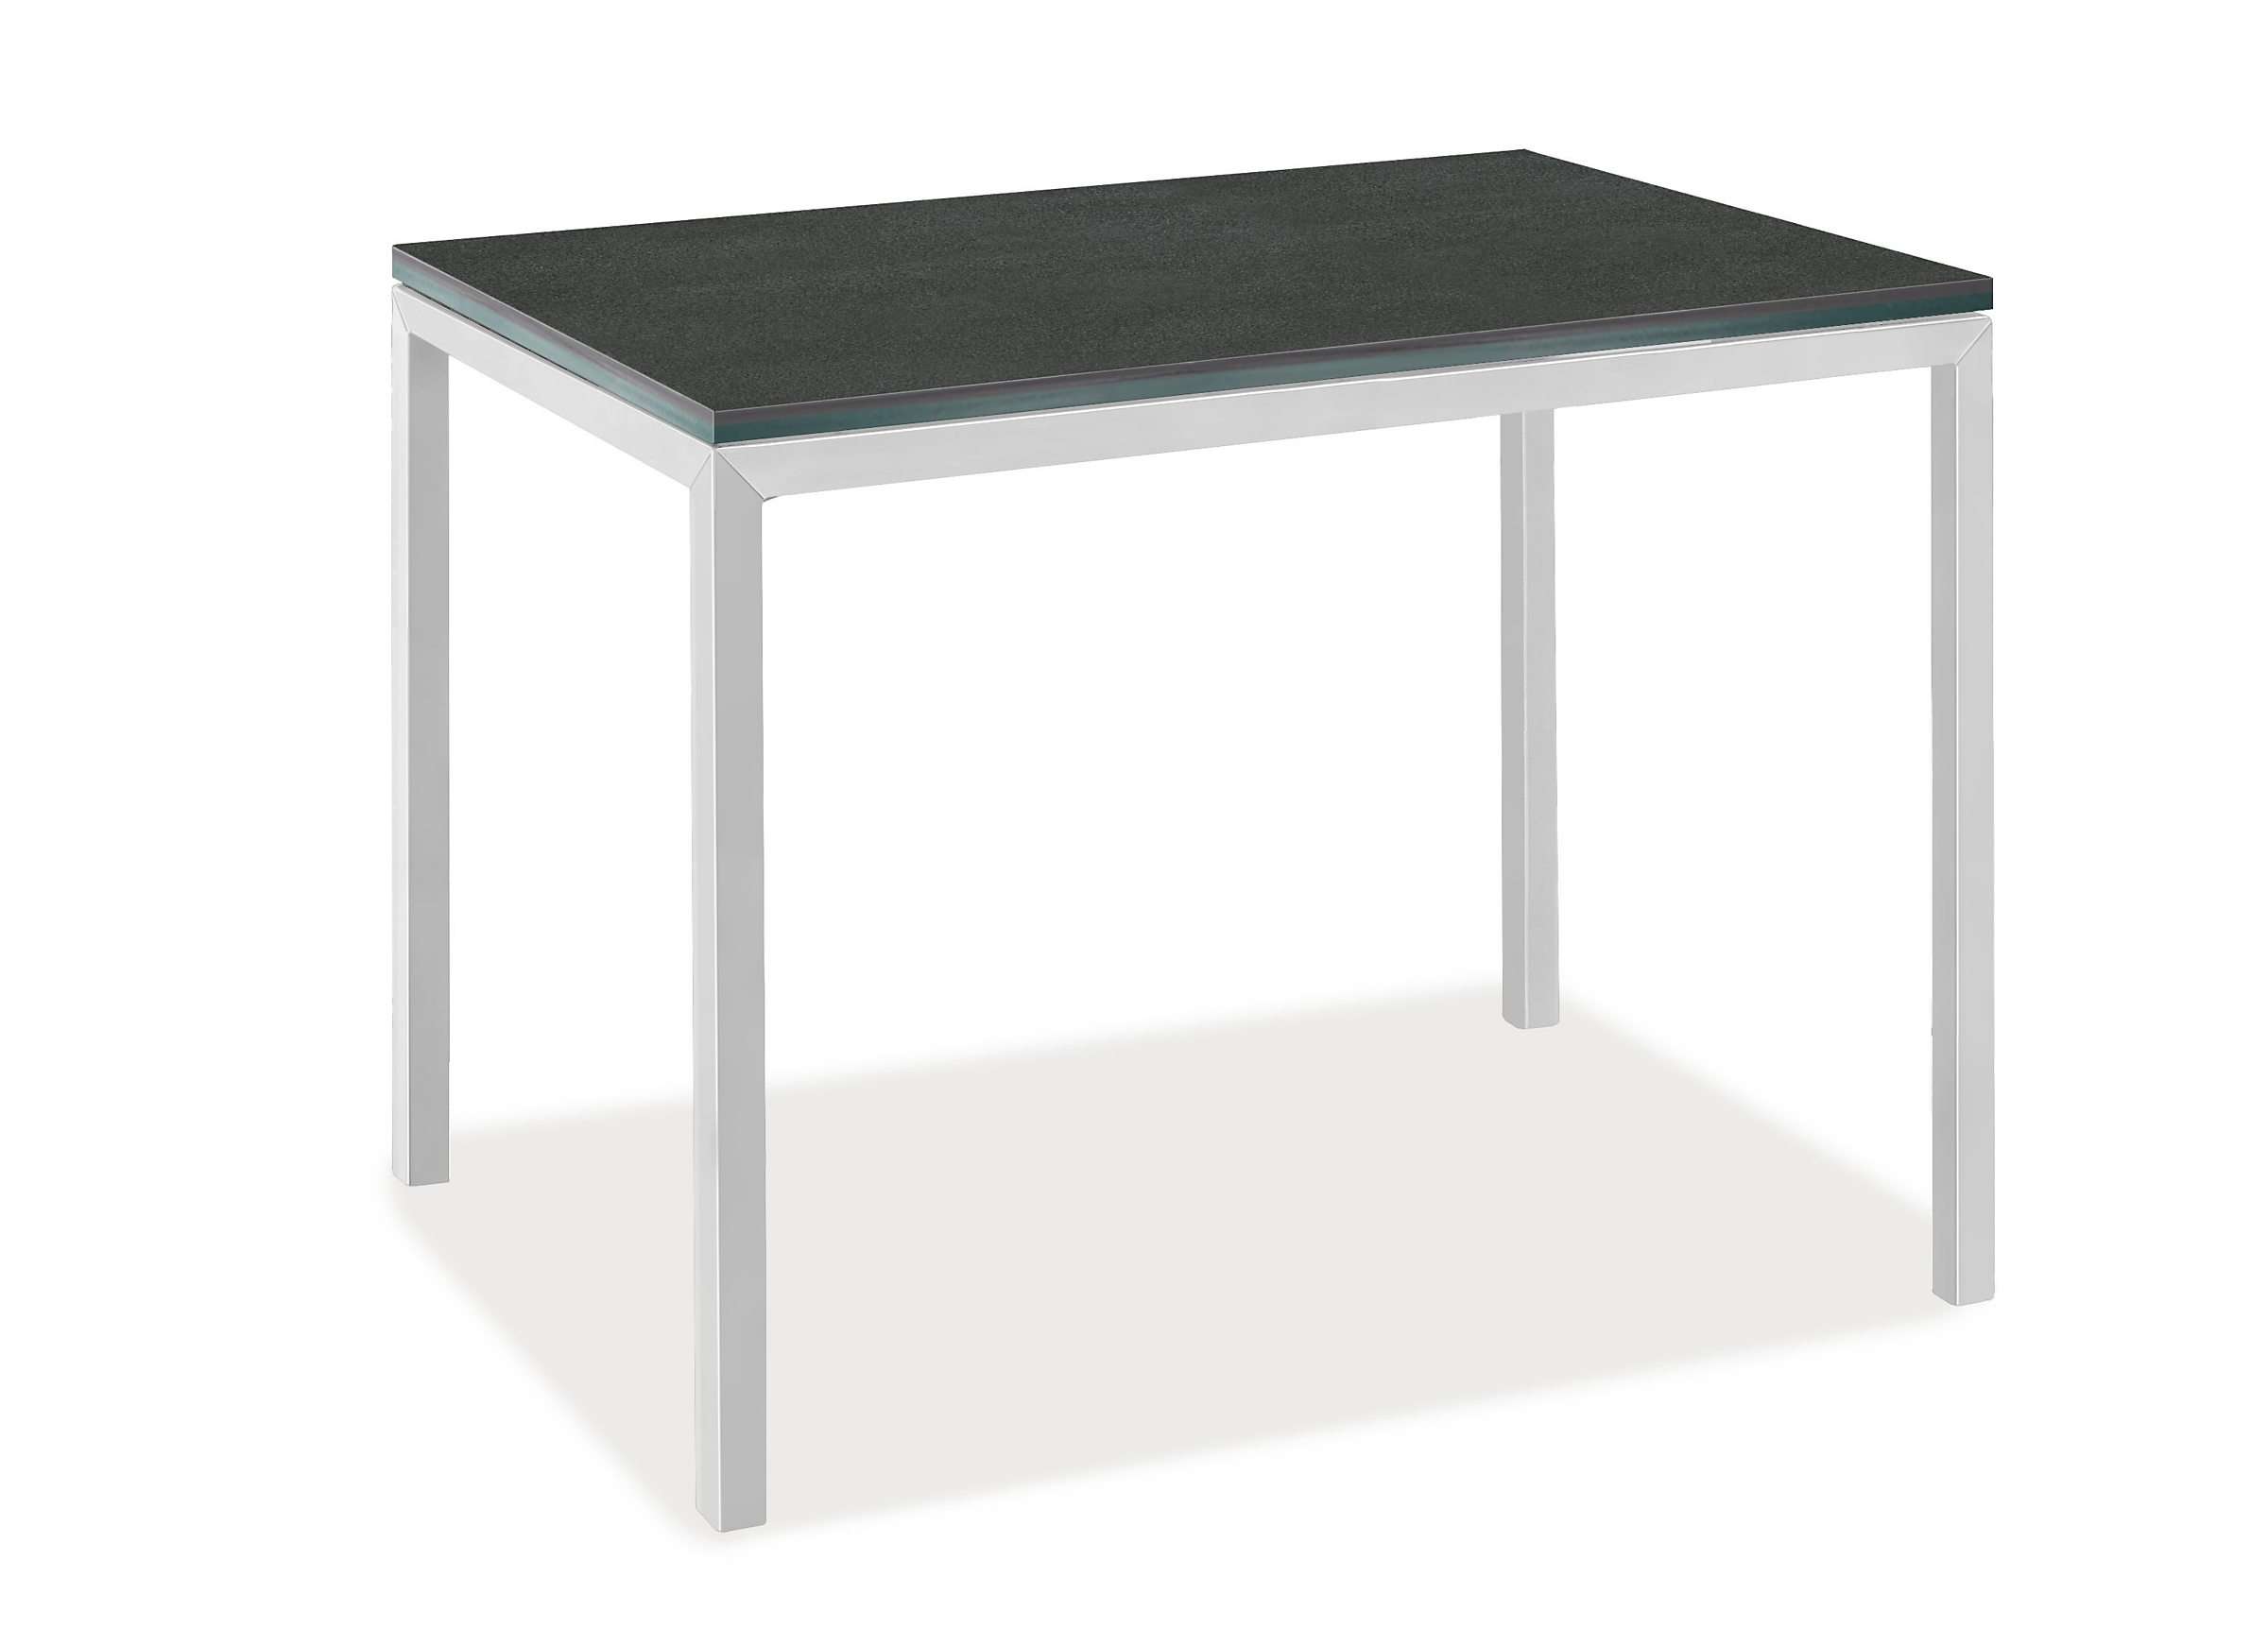 Parsons 30w 20d 20h Outdoor Side Table in Graphite with Dark Grey Ceramic Top